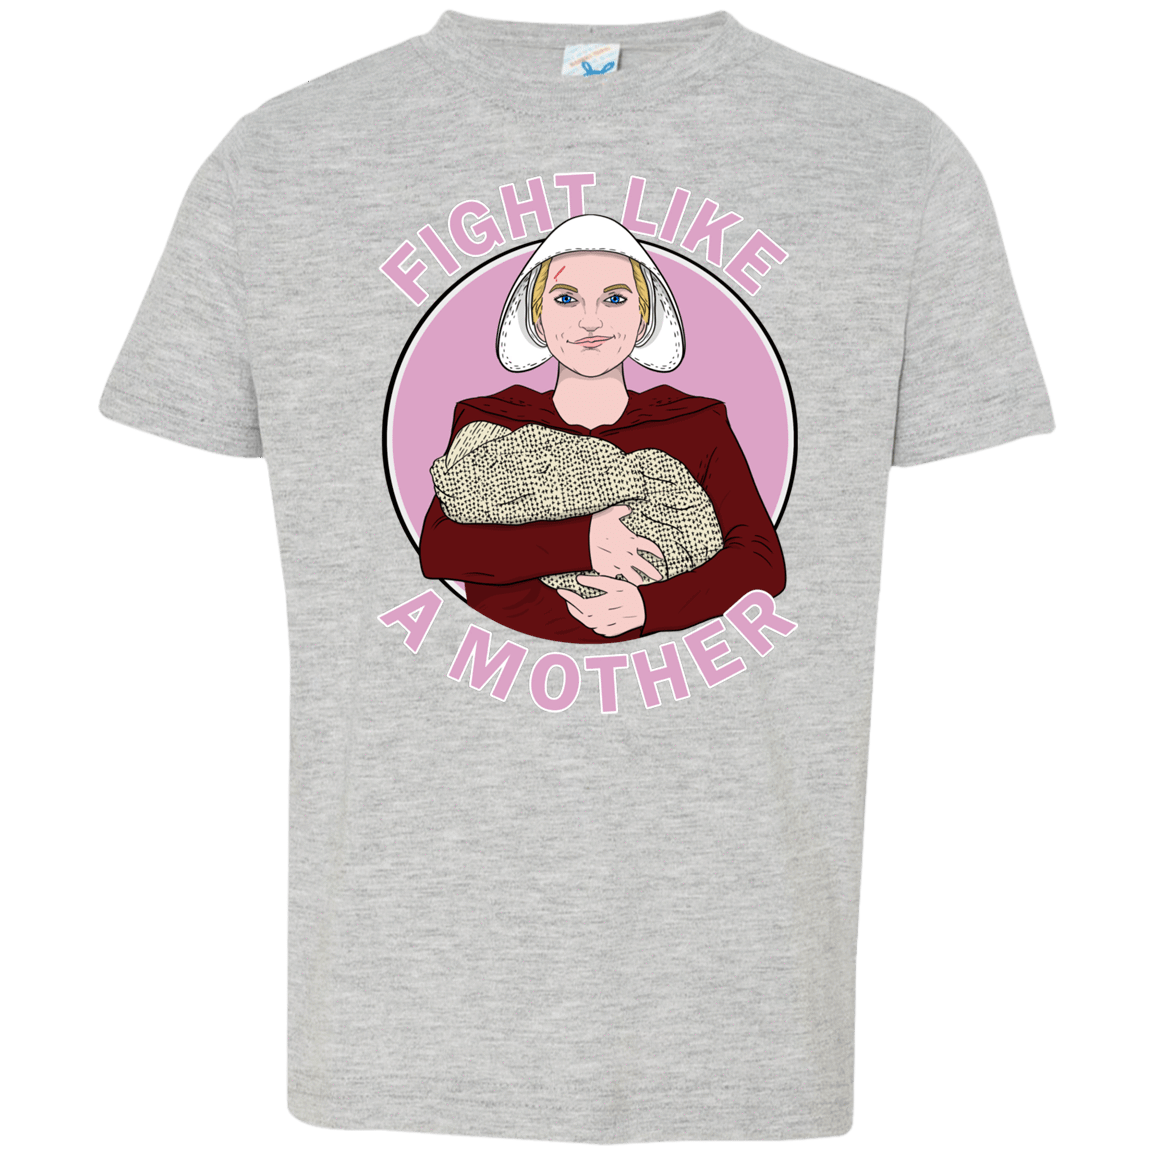 T-Shirts Heather Grey / 2T Fight Like a Mother Toddler Premium T-Shirt